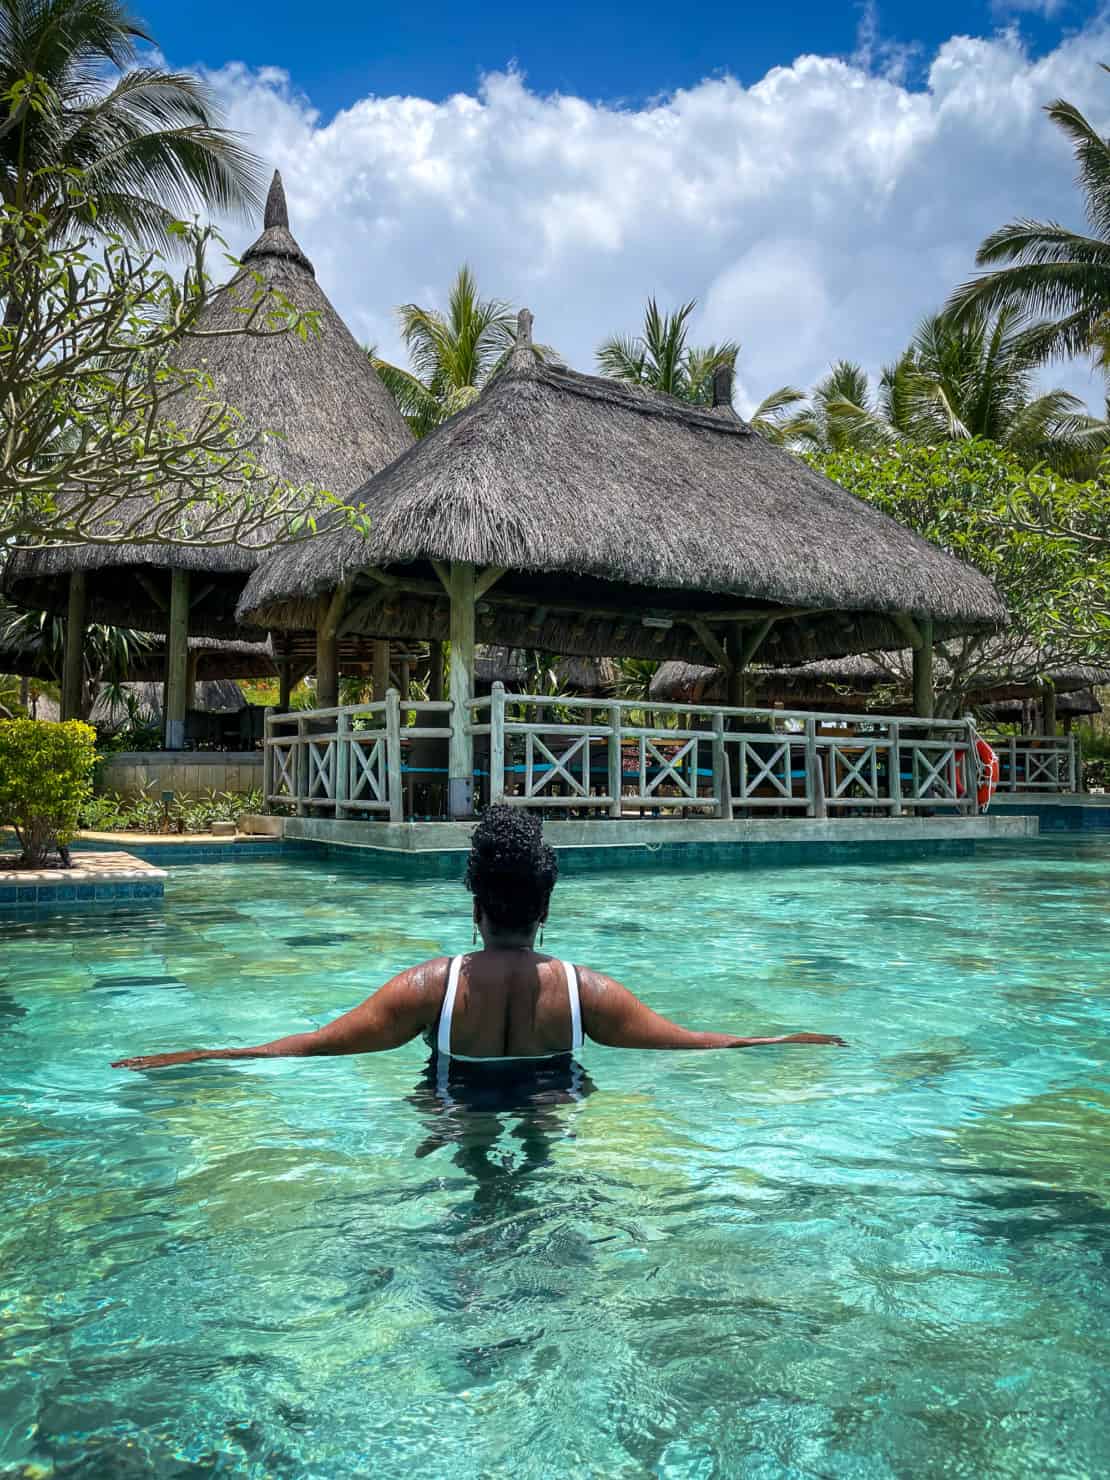 
Bandi swimming by the thatched rooms of La Pirogue in Mauritius